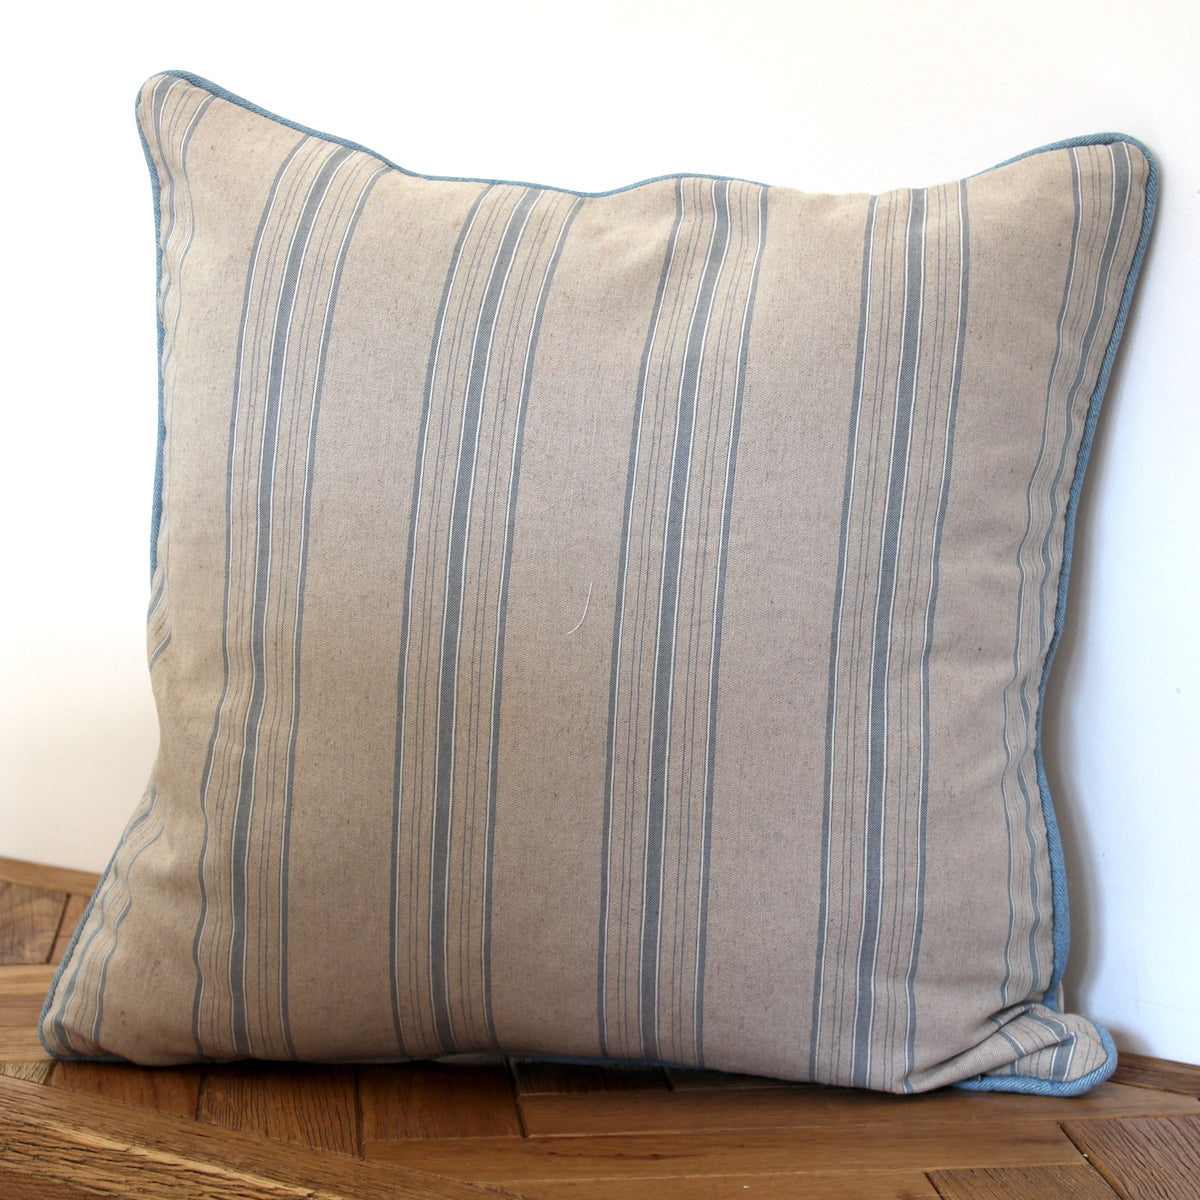 Blue Striped Piped Linen Cushion